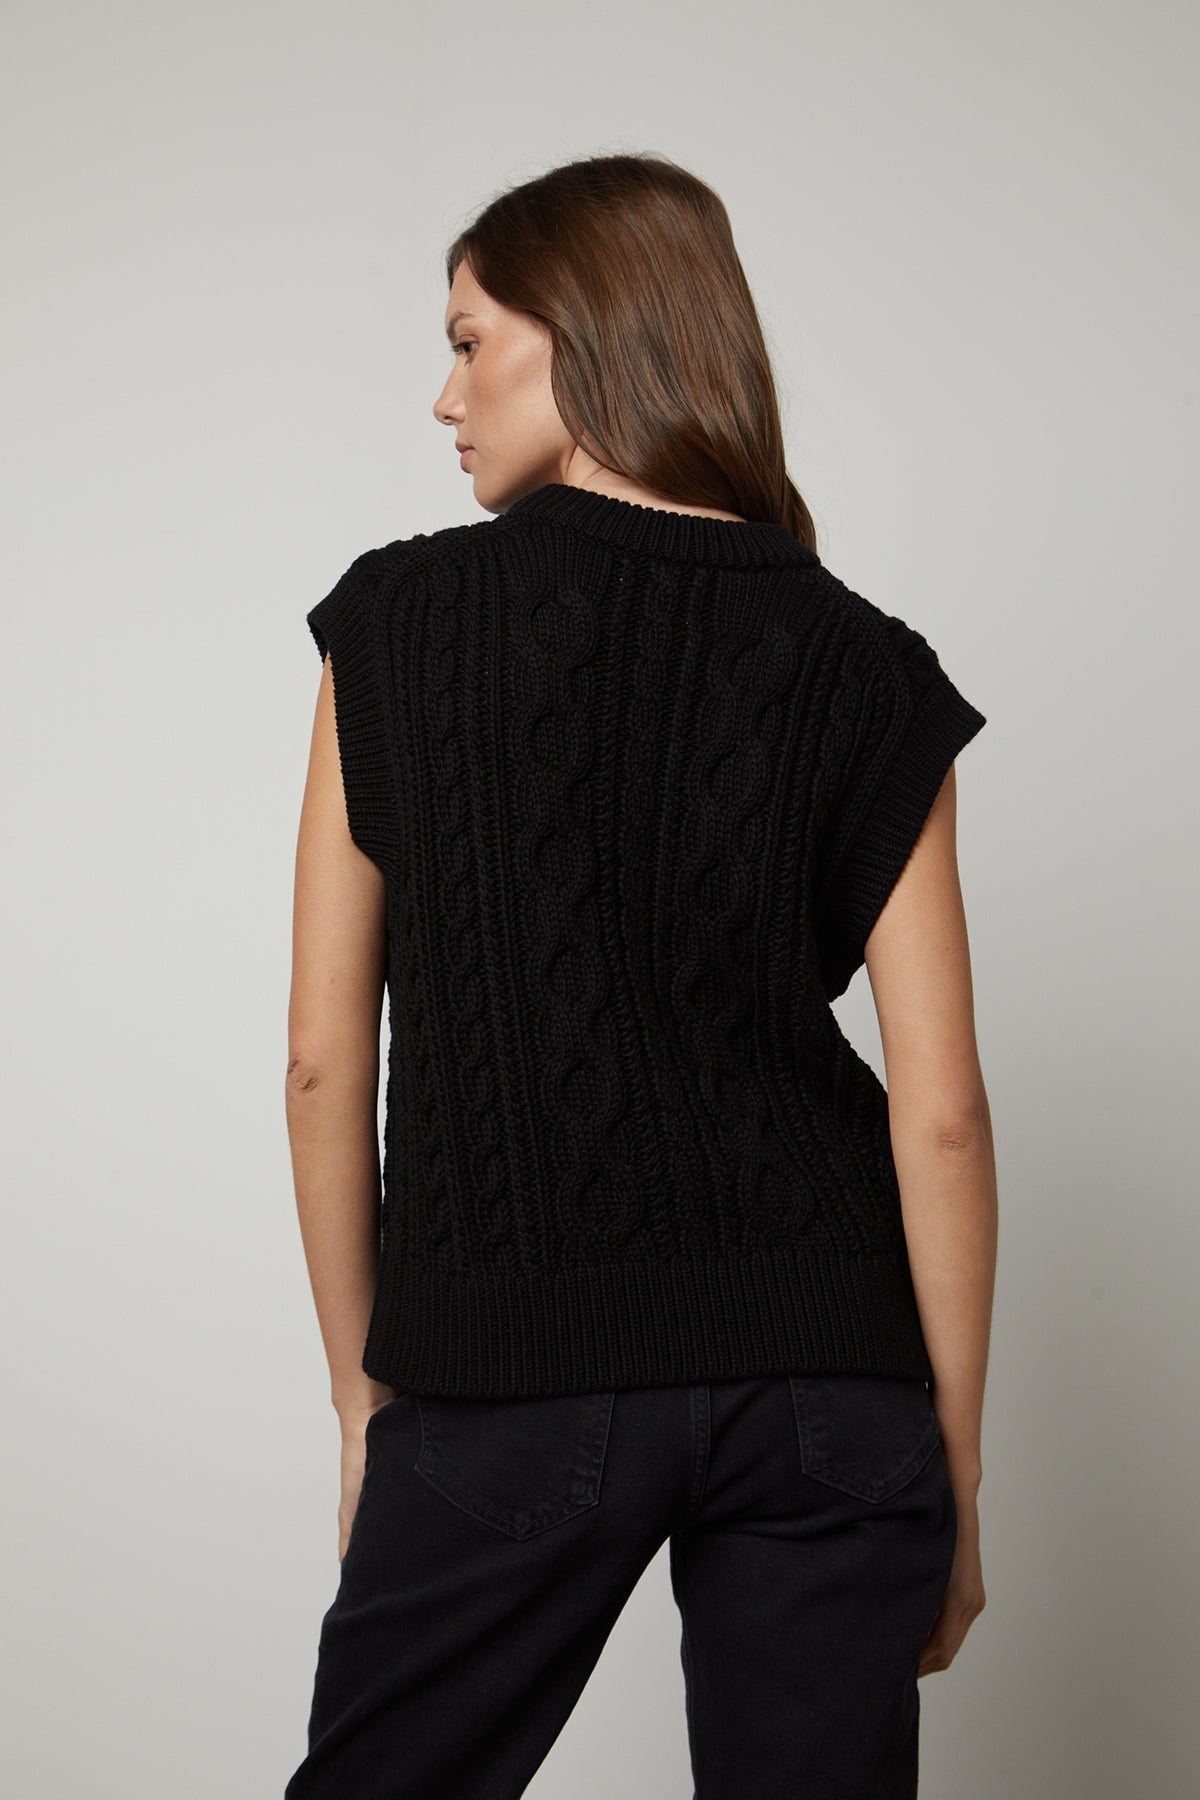   The back view of a woman wearing a black HADDEN SWEATER VEST by Velvet by Graham & Spencer. 